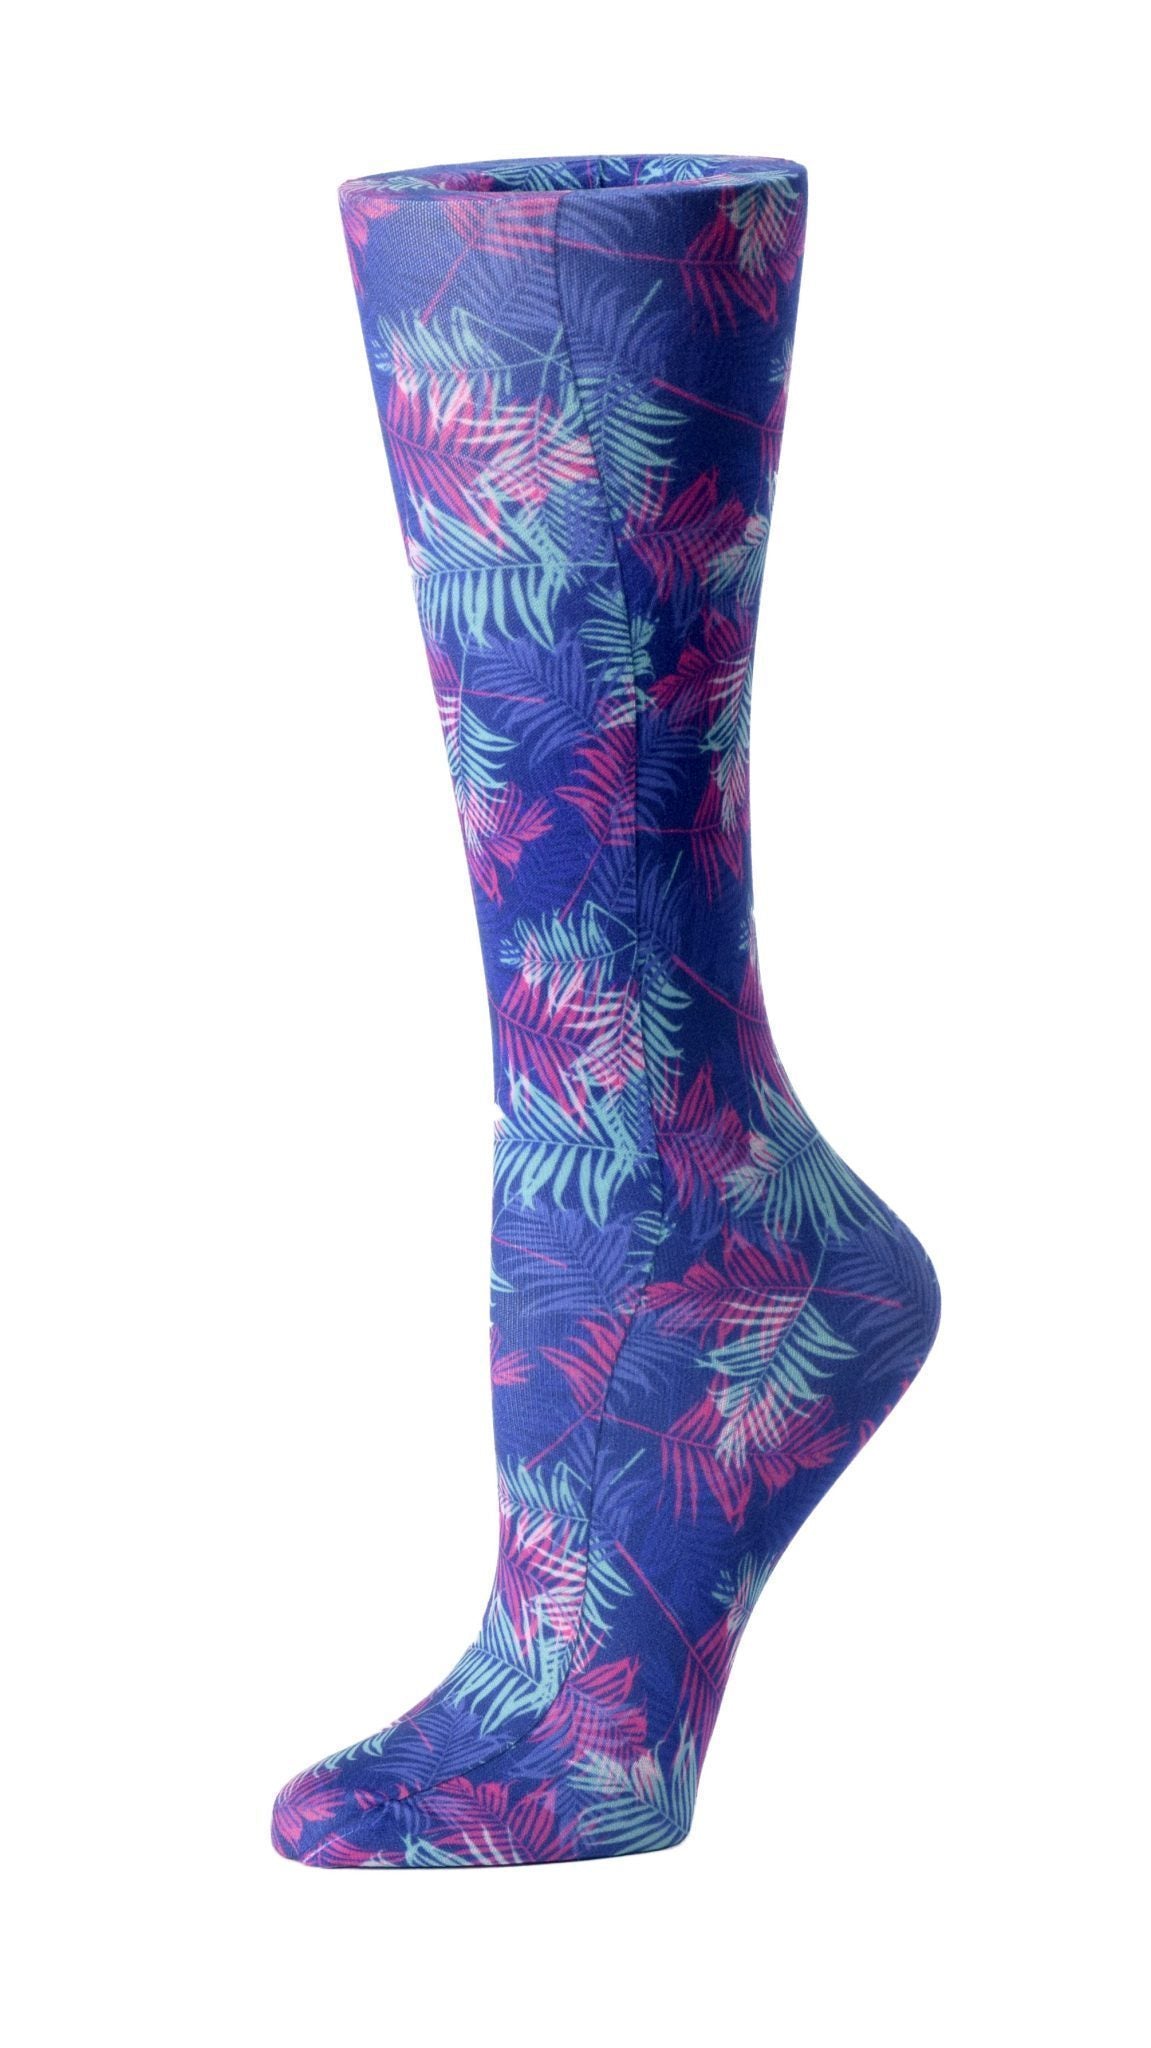 Cutieful Moderate Compression Socks 10-18 MMhg Wide Calf Knit Print Pattern Neon Tropics at Parker's Clothing and Shoes.